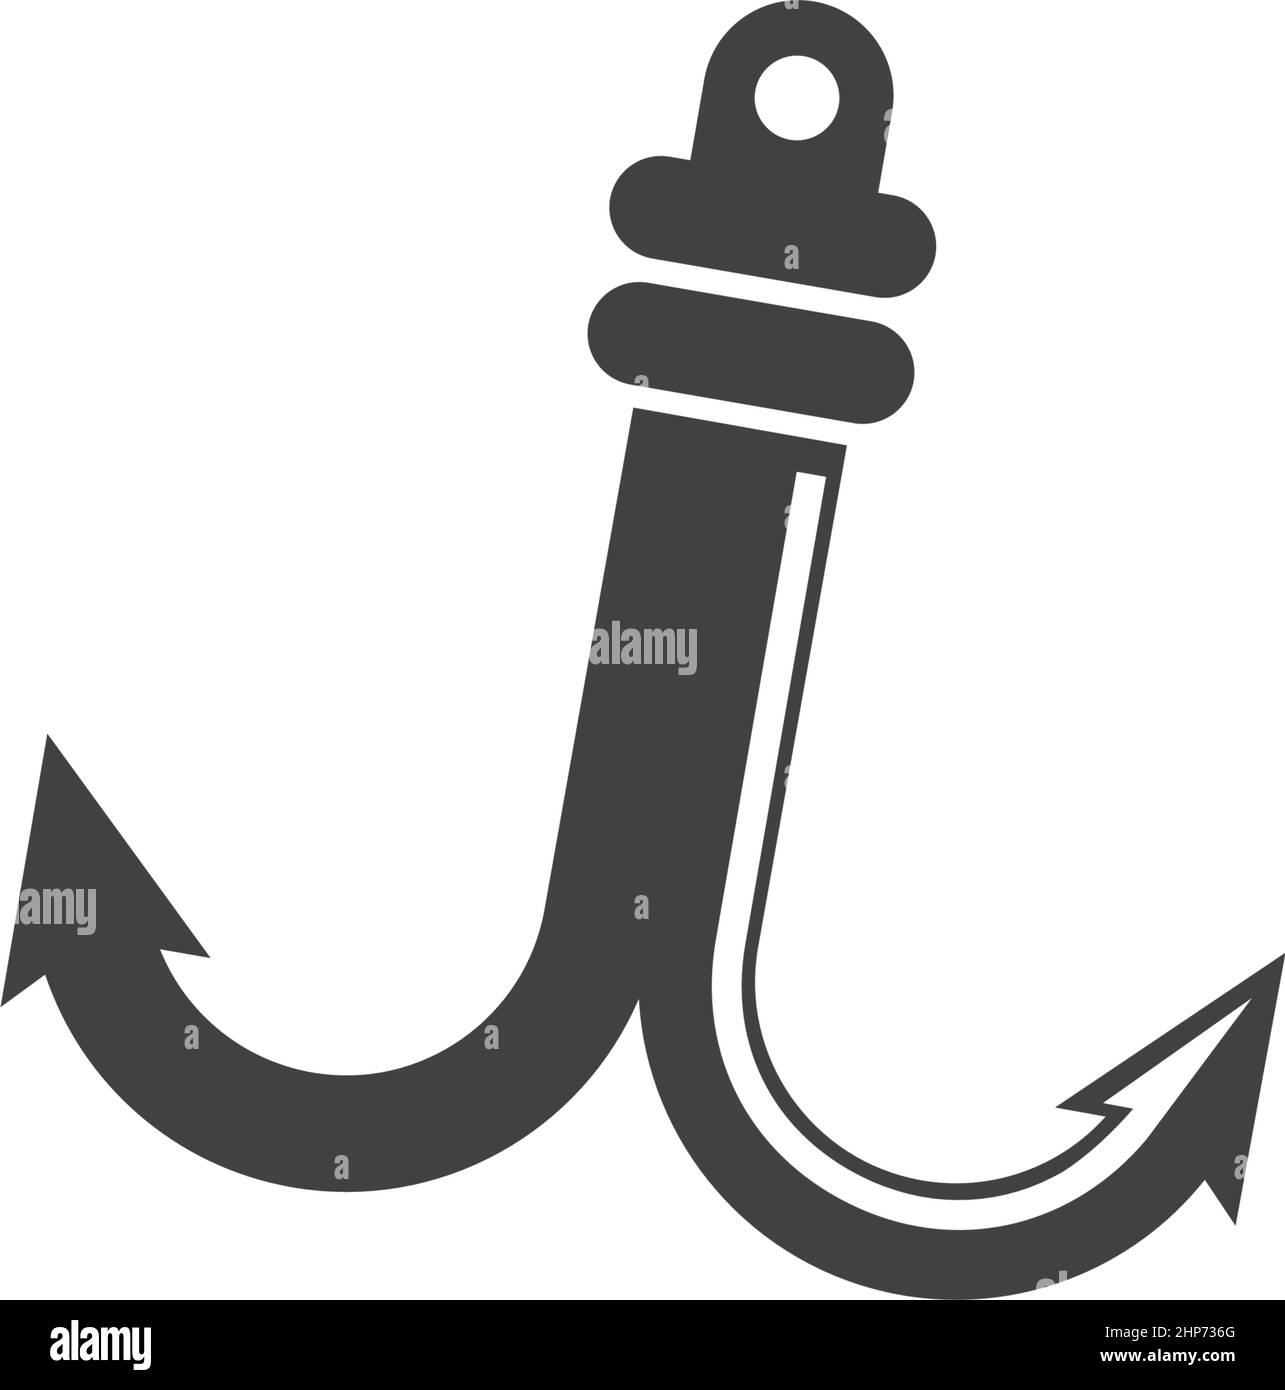 Grappling hook Cut Out Stock Images & Pictures - Alamy